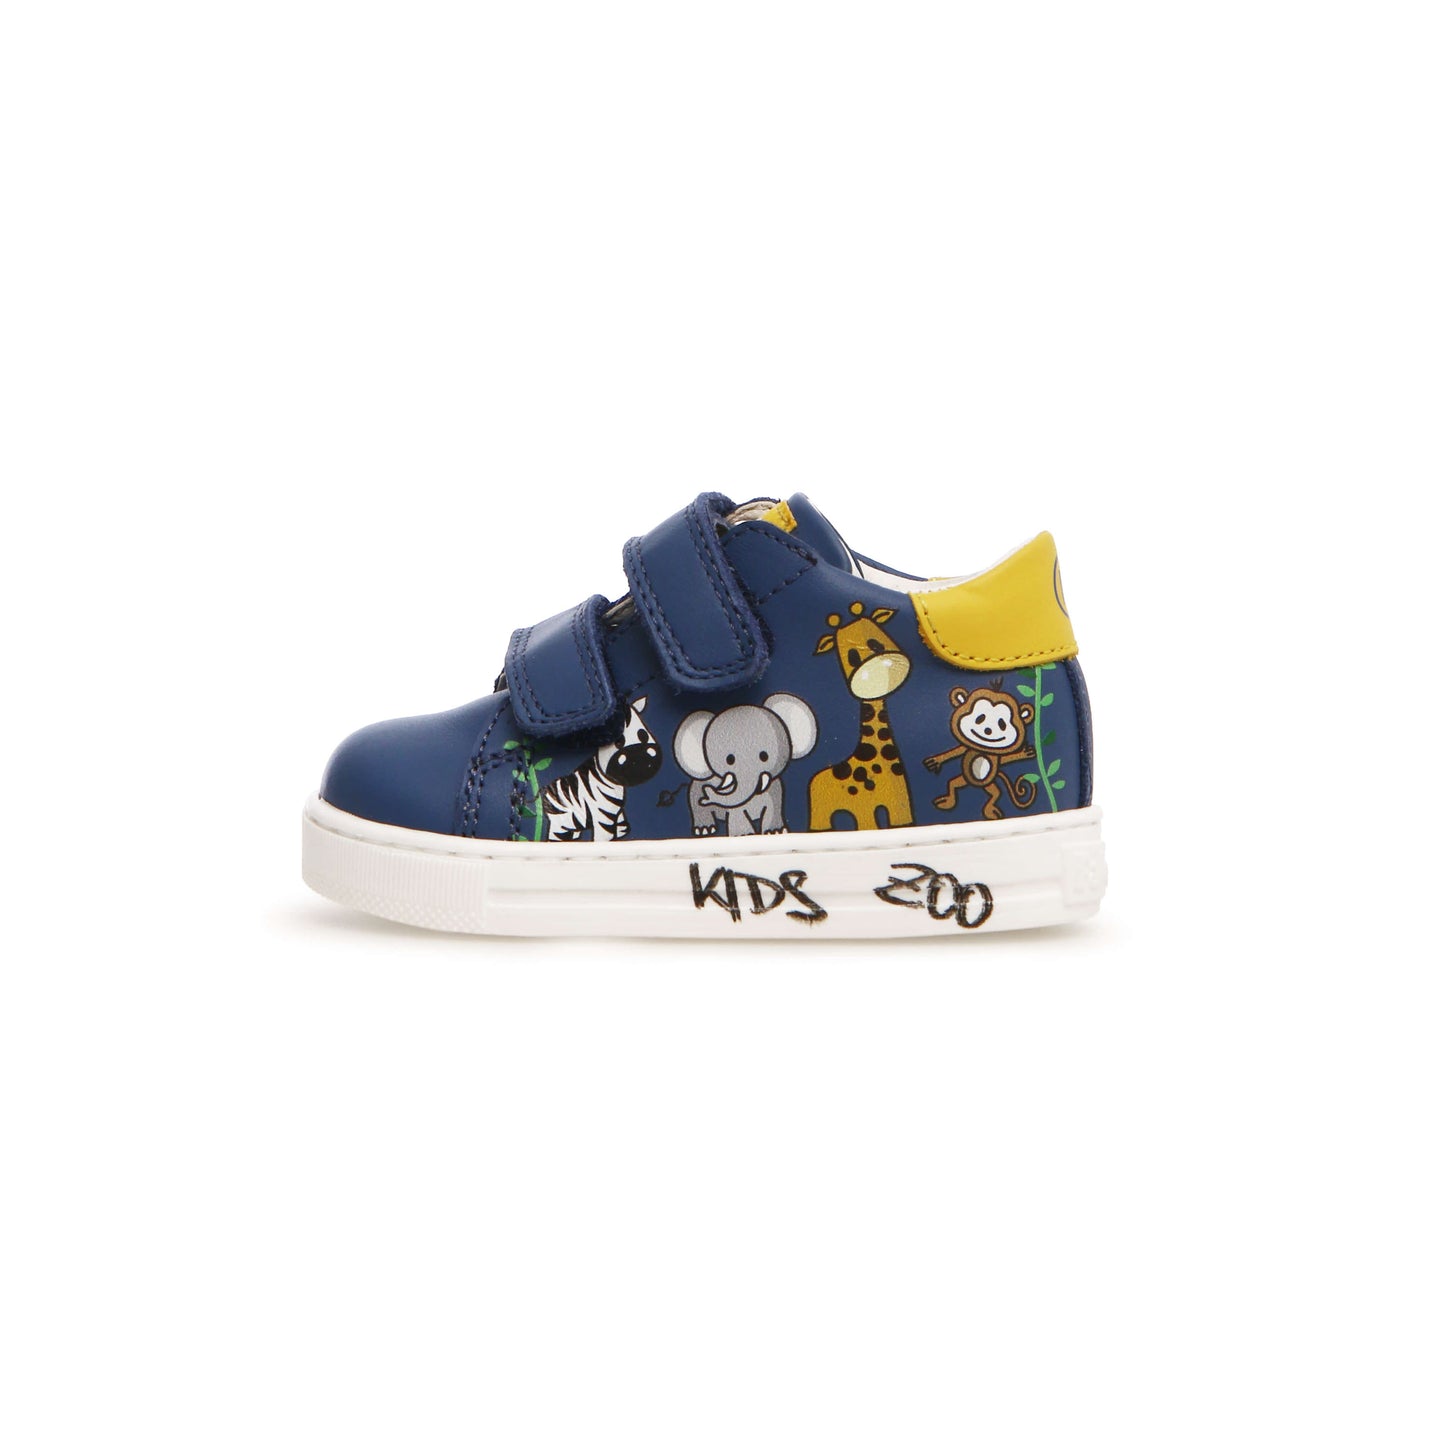 Boys Blue Leather Sneakers w/Animal Print Side 2